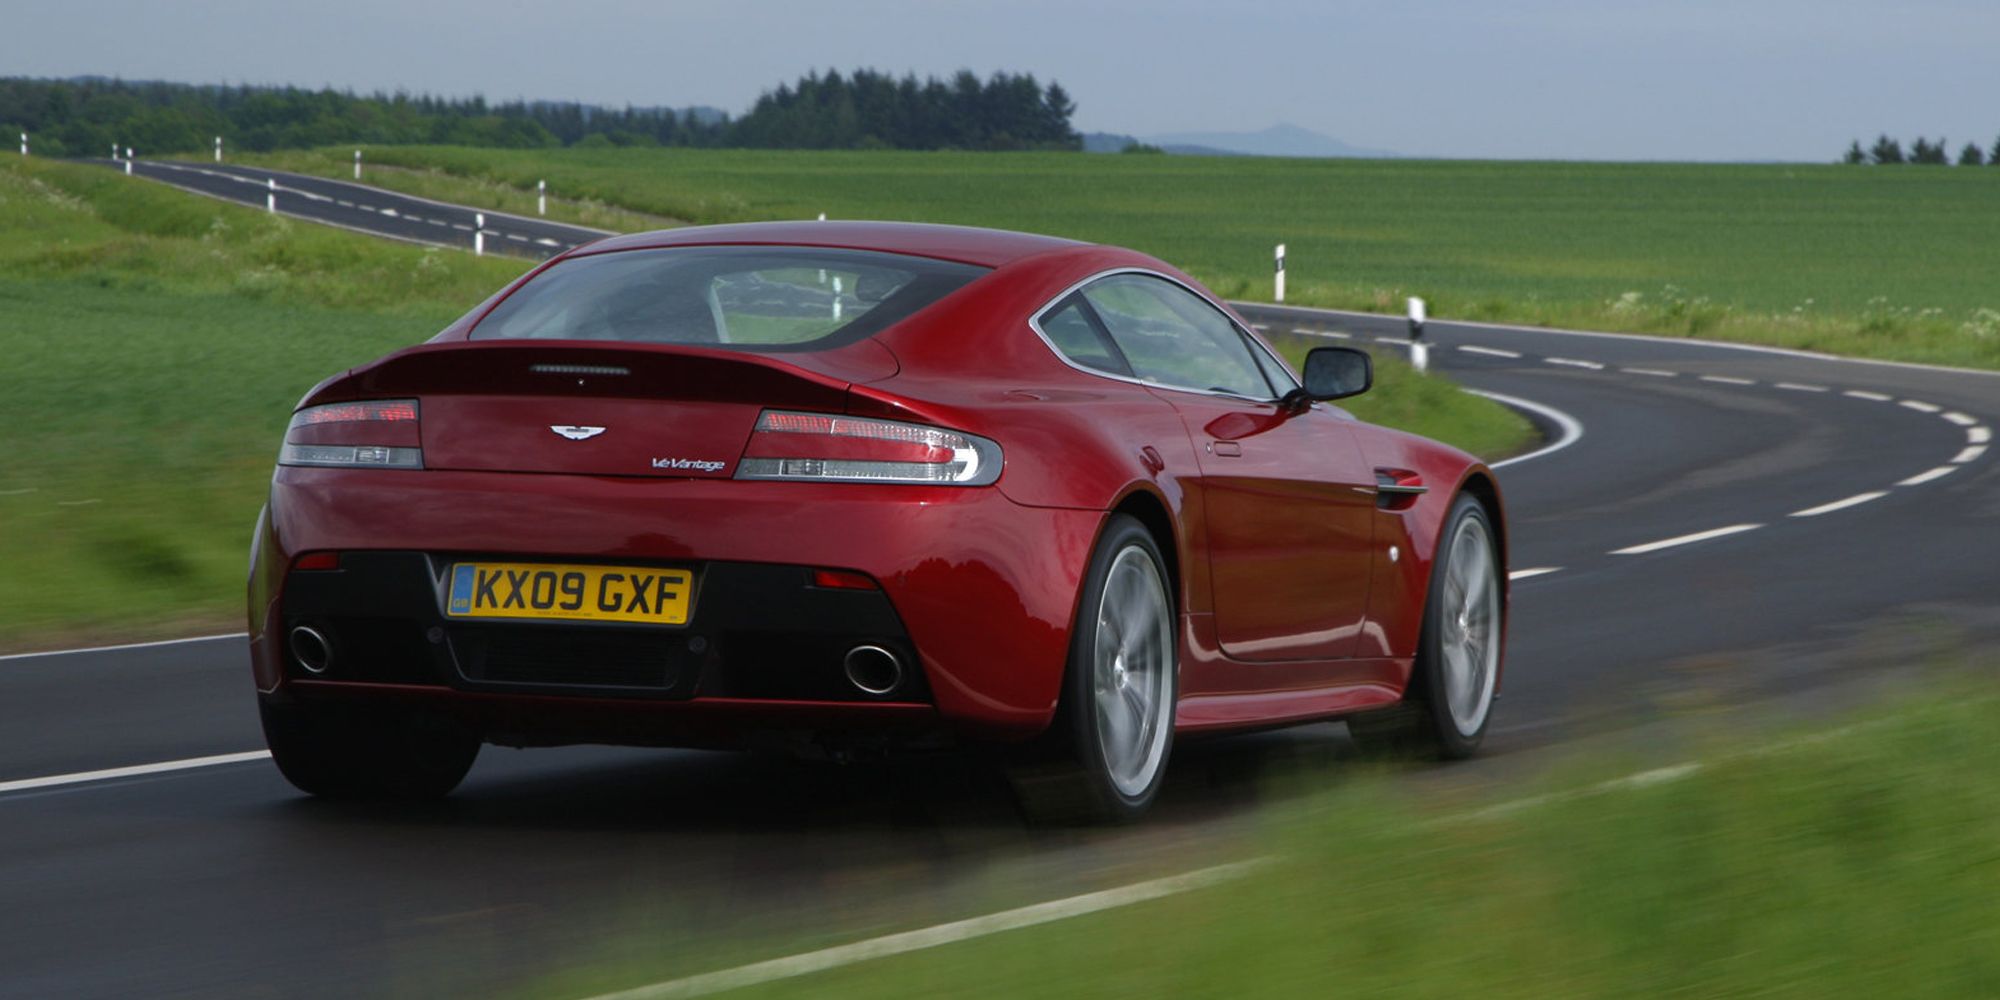 The rear of a red V12 Vantage on the move